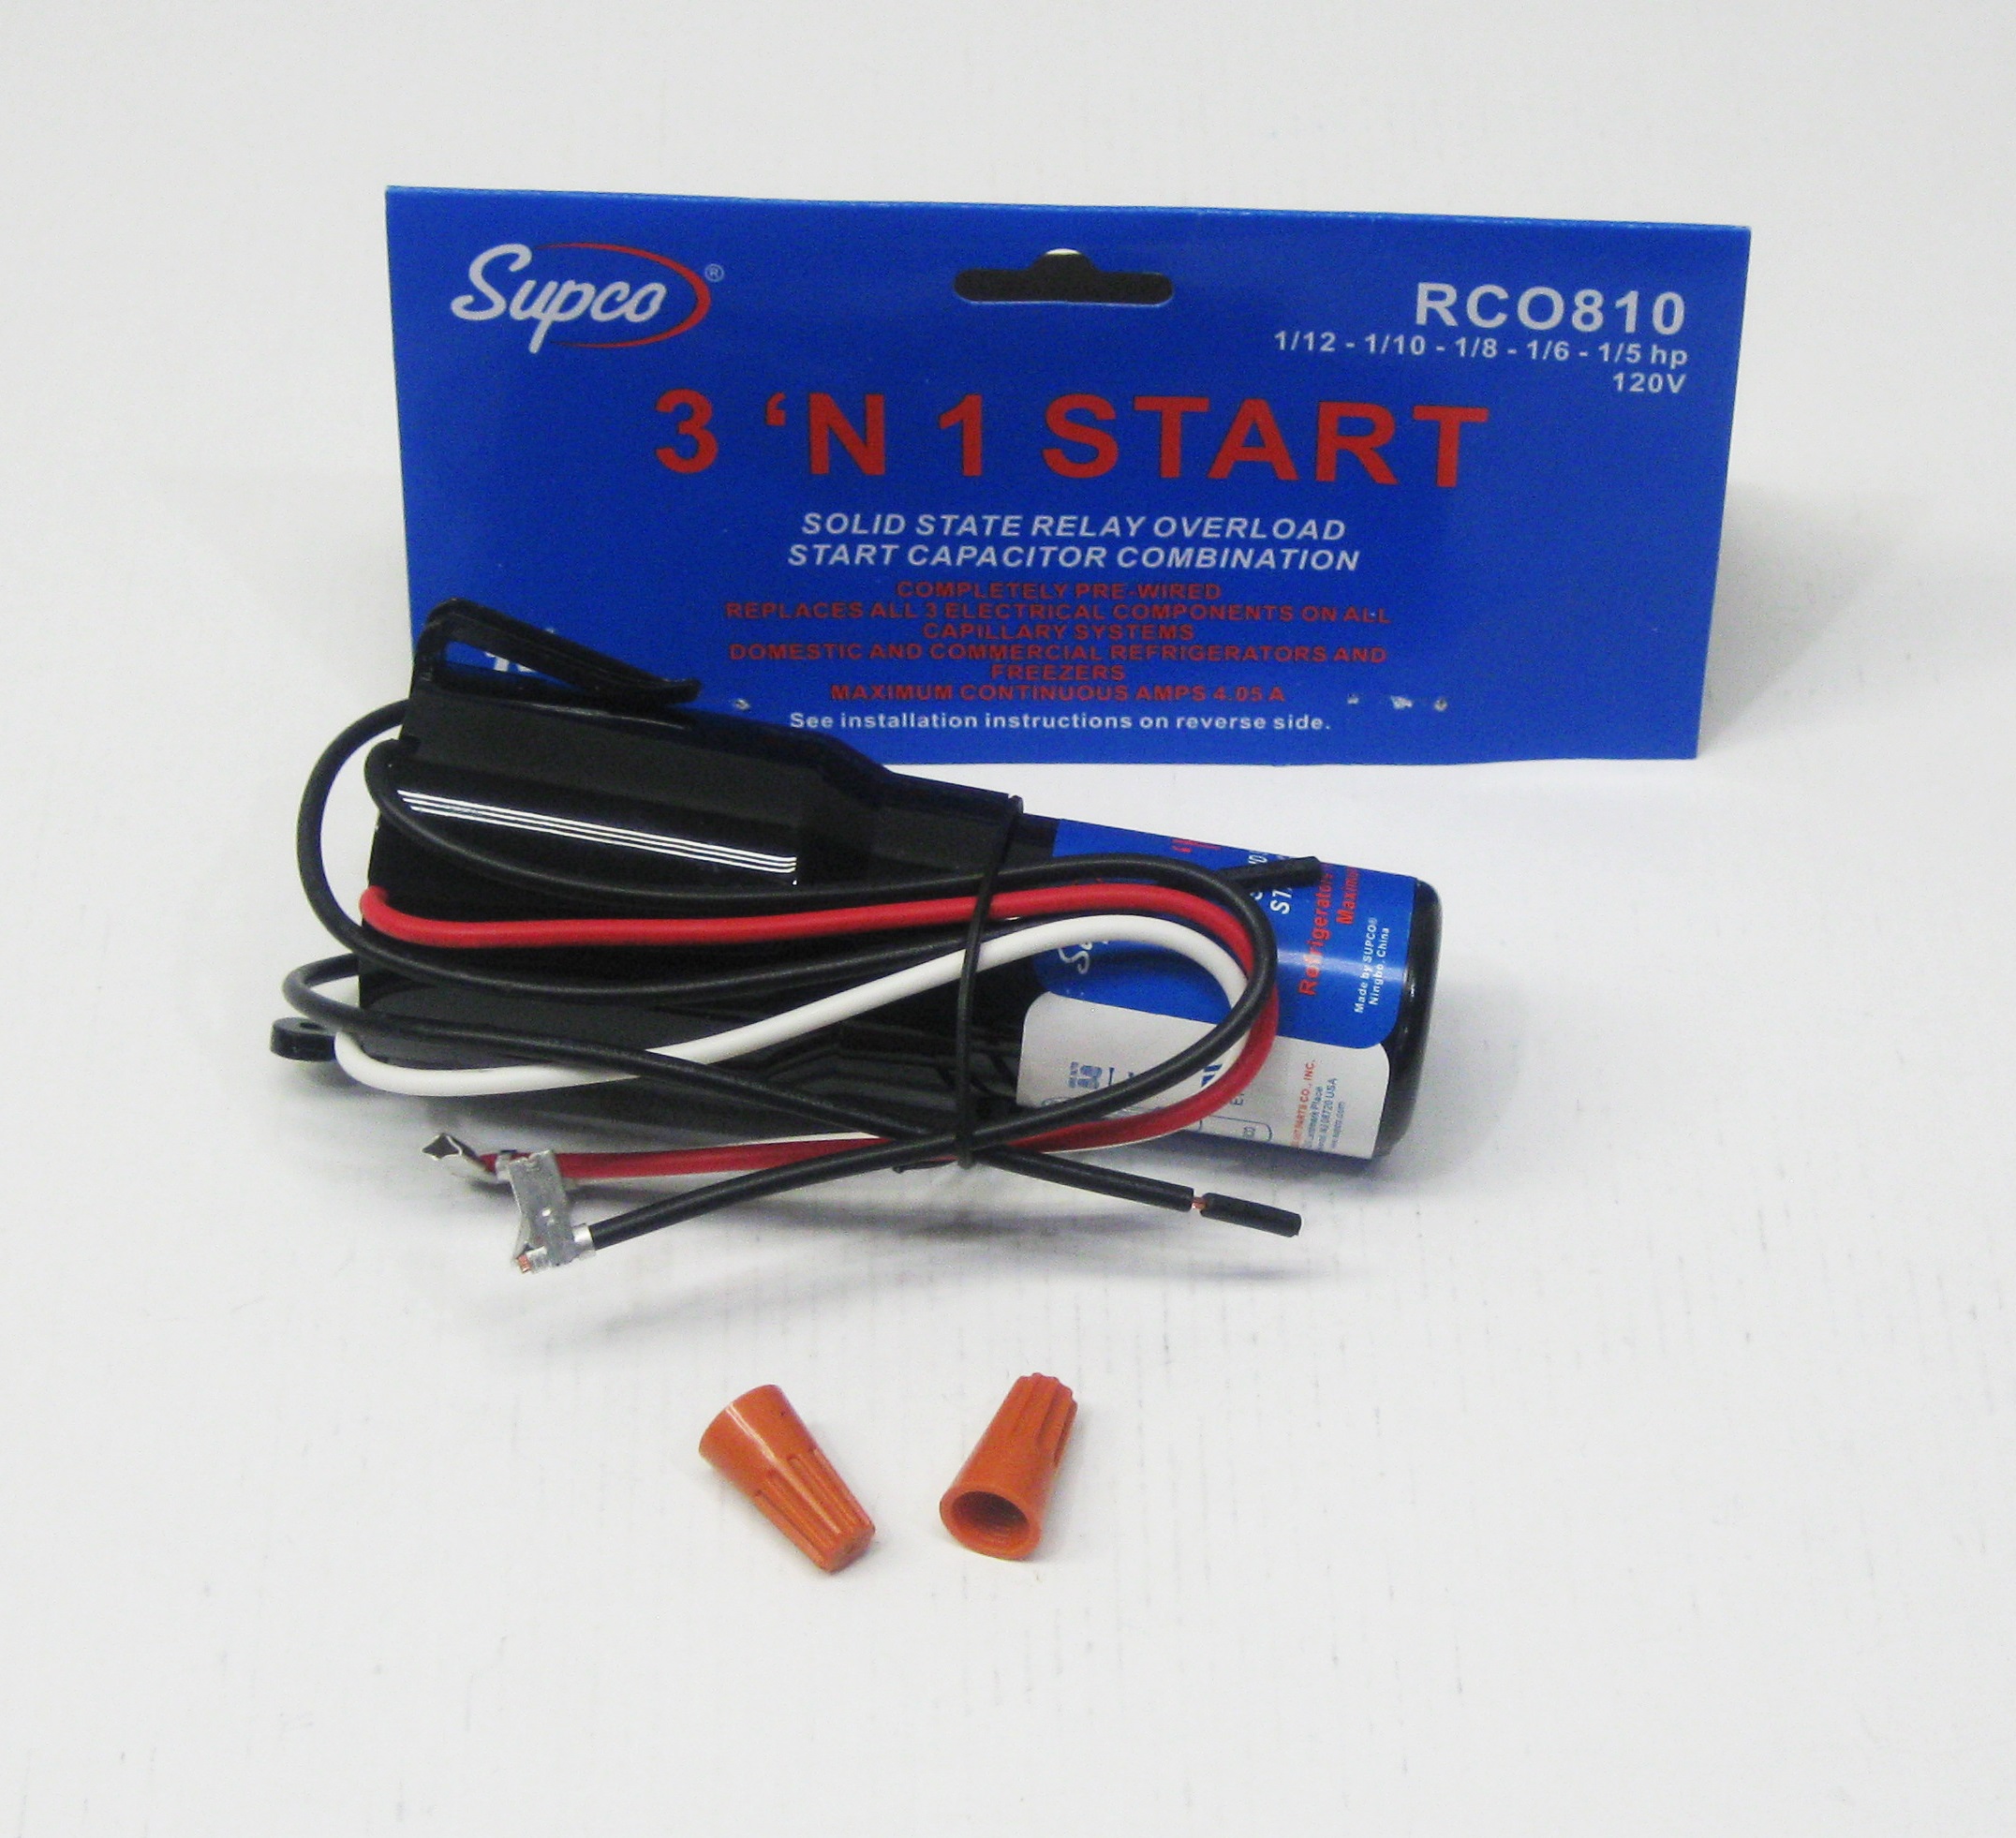 Supco RCO810 Refrigerator Relay Capacitor Overload RC0810 3-in-1